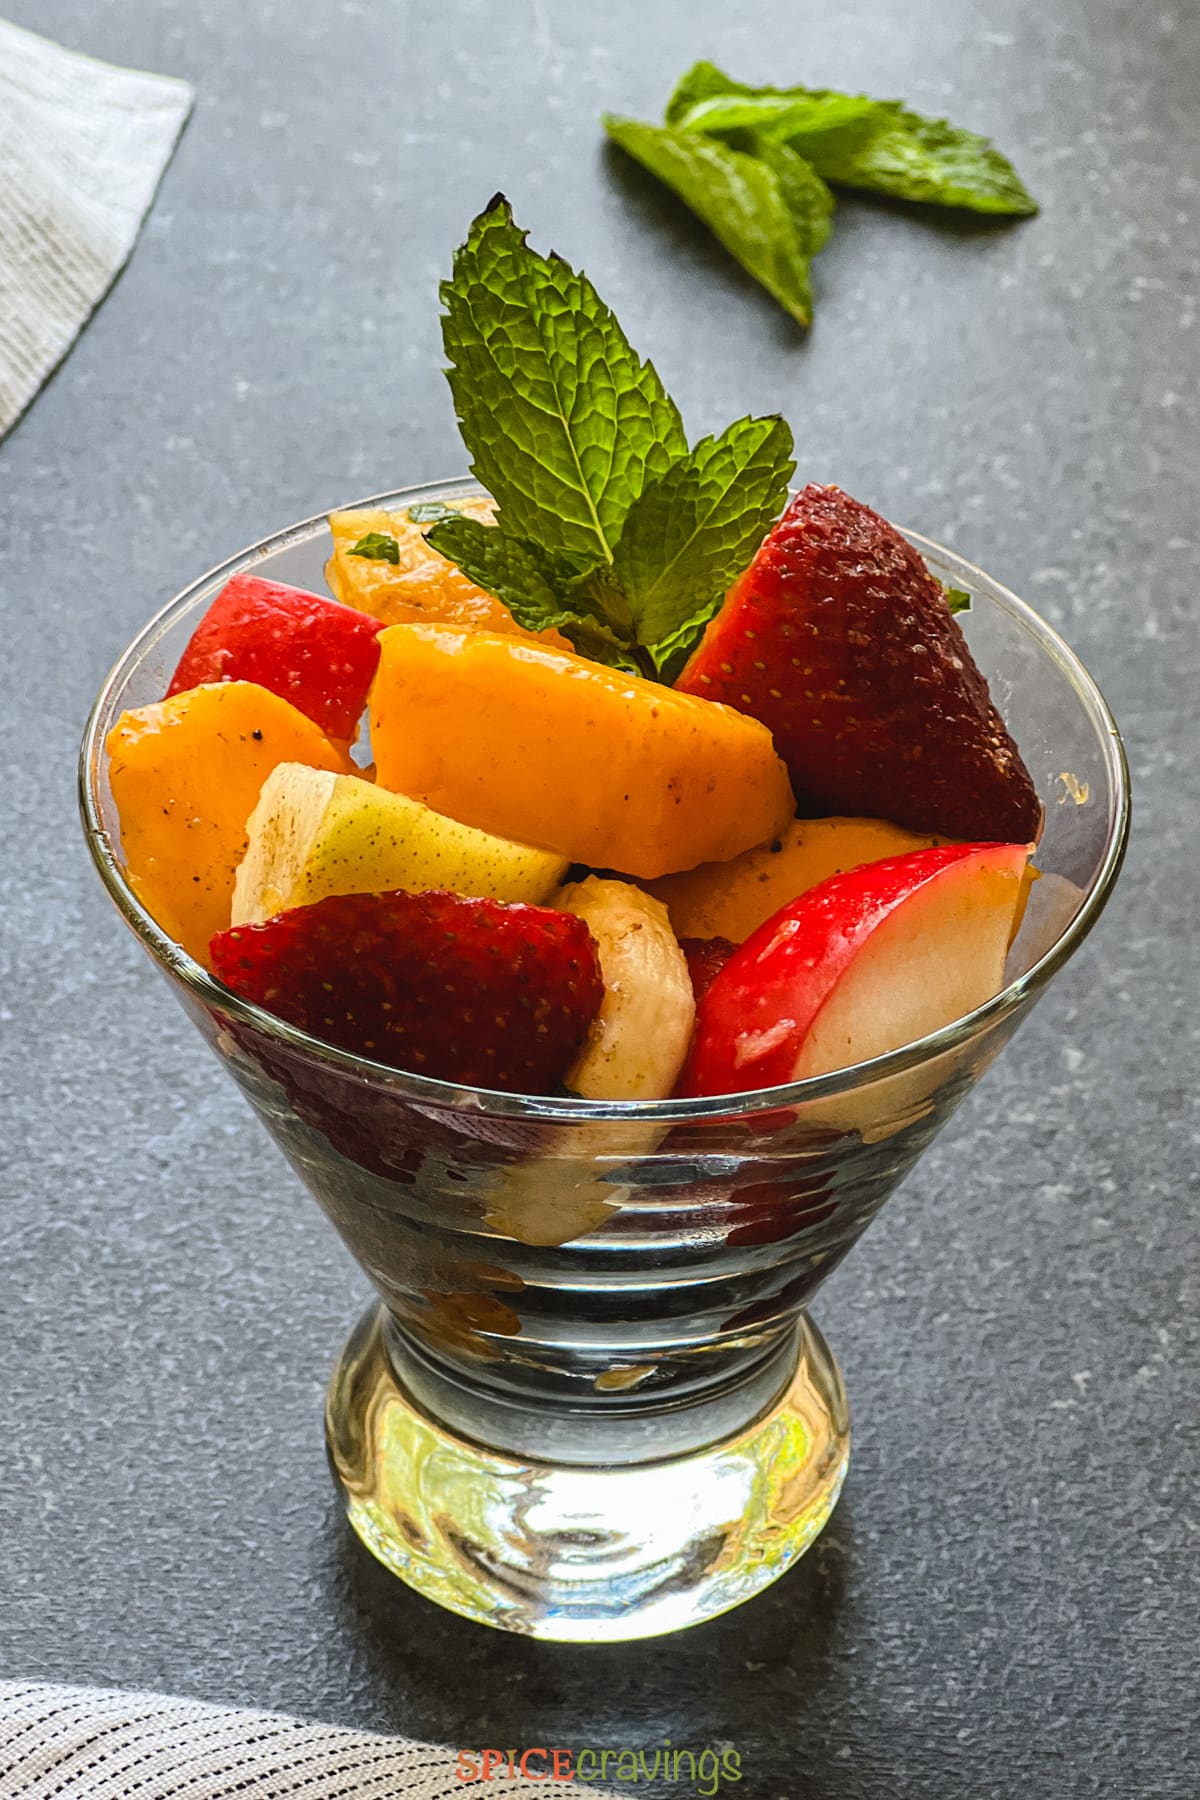 Fruit salad in martini glass garnished with mint leaves